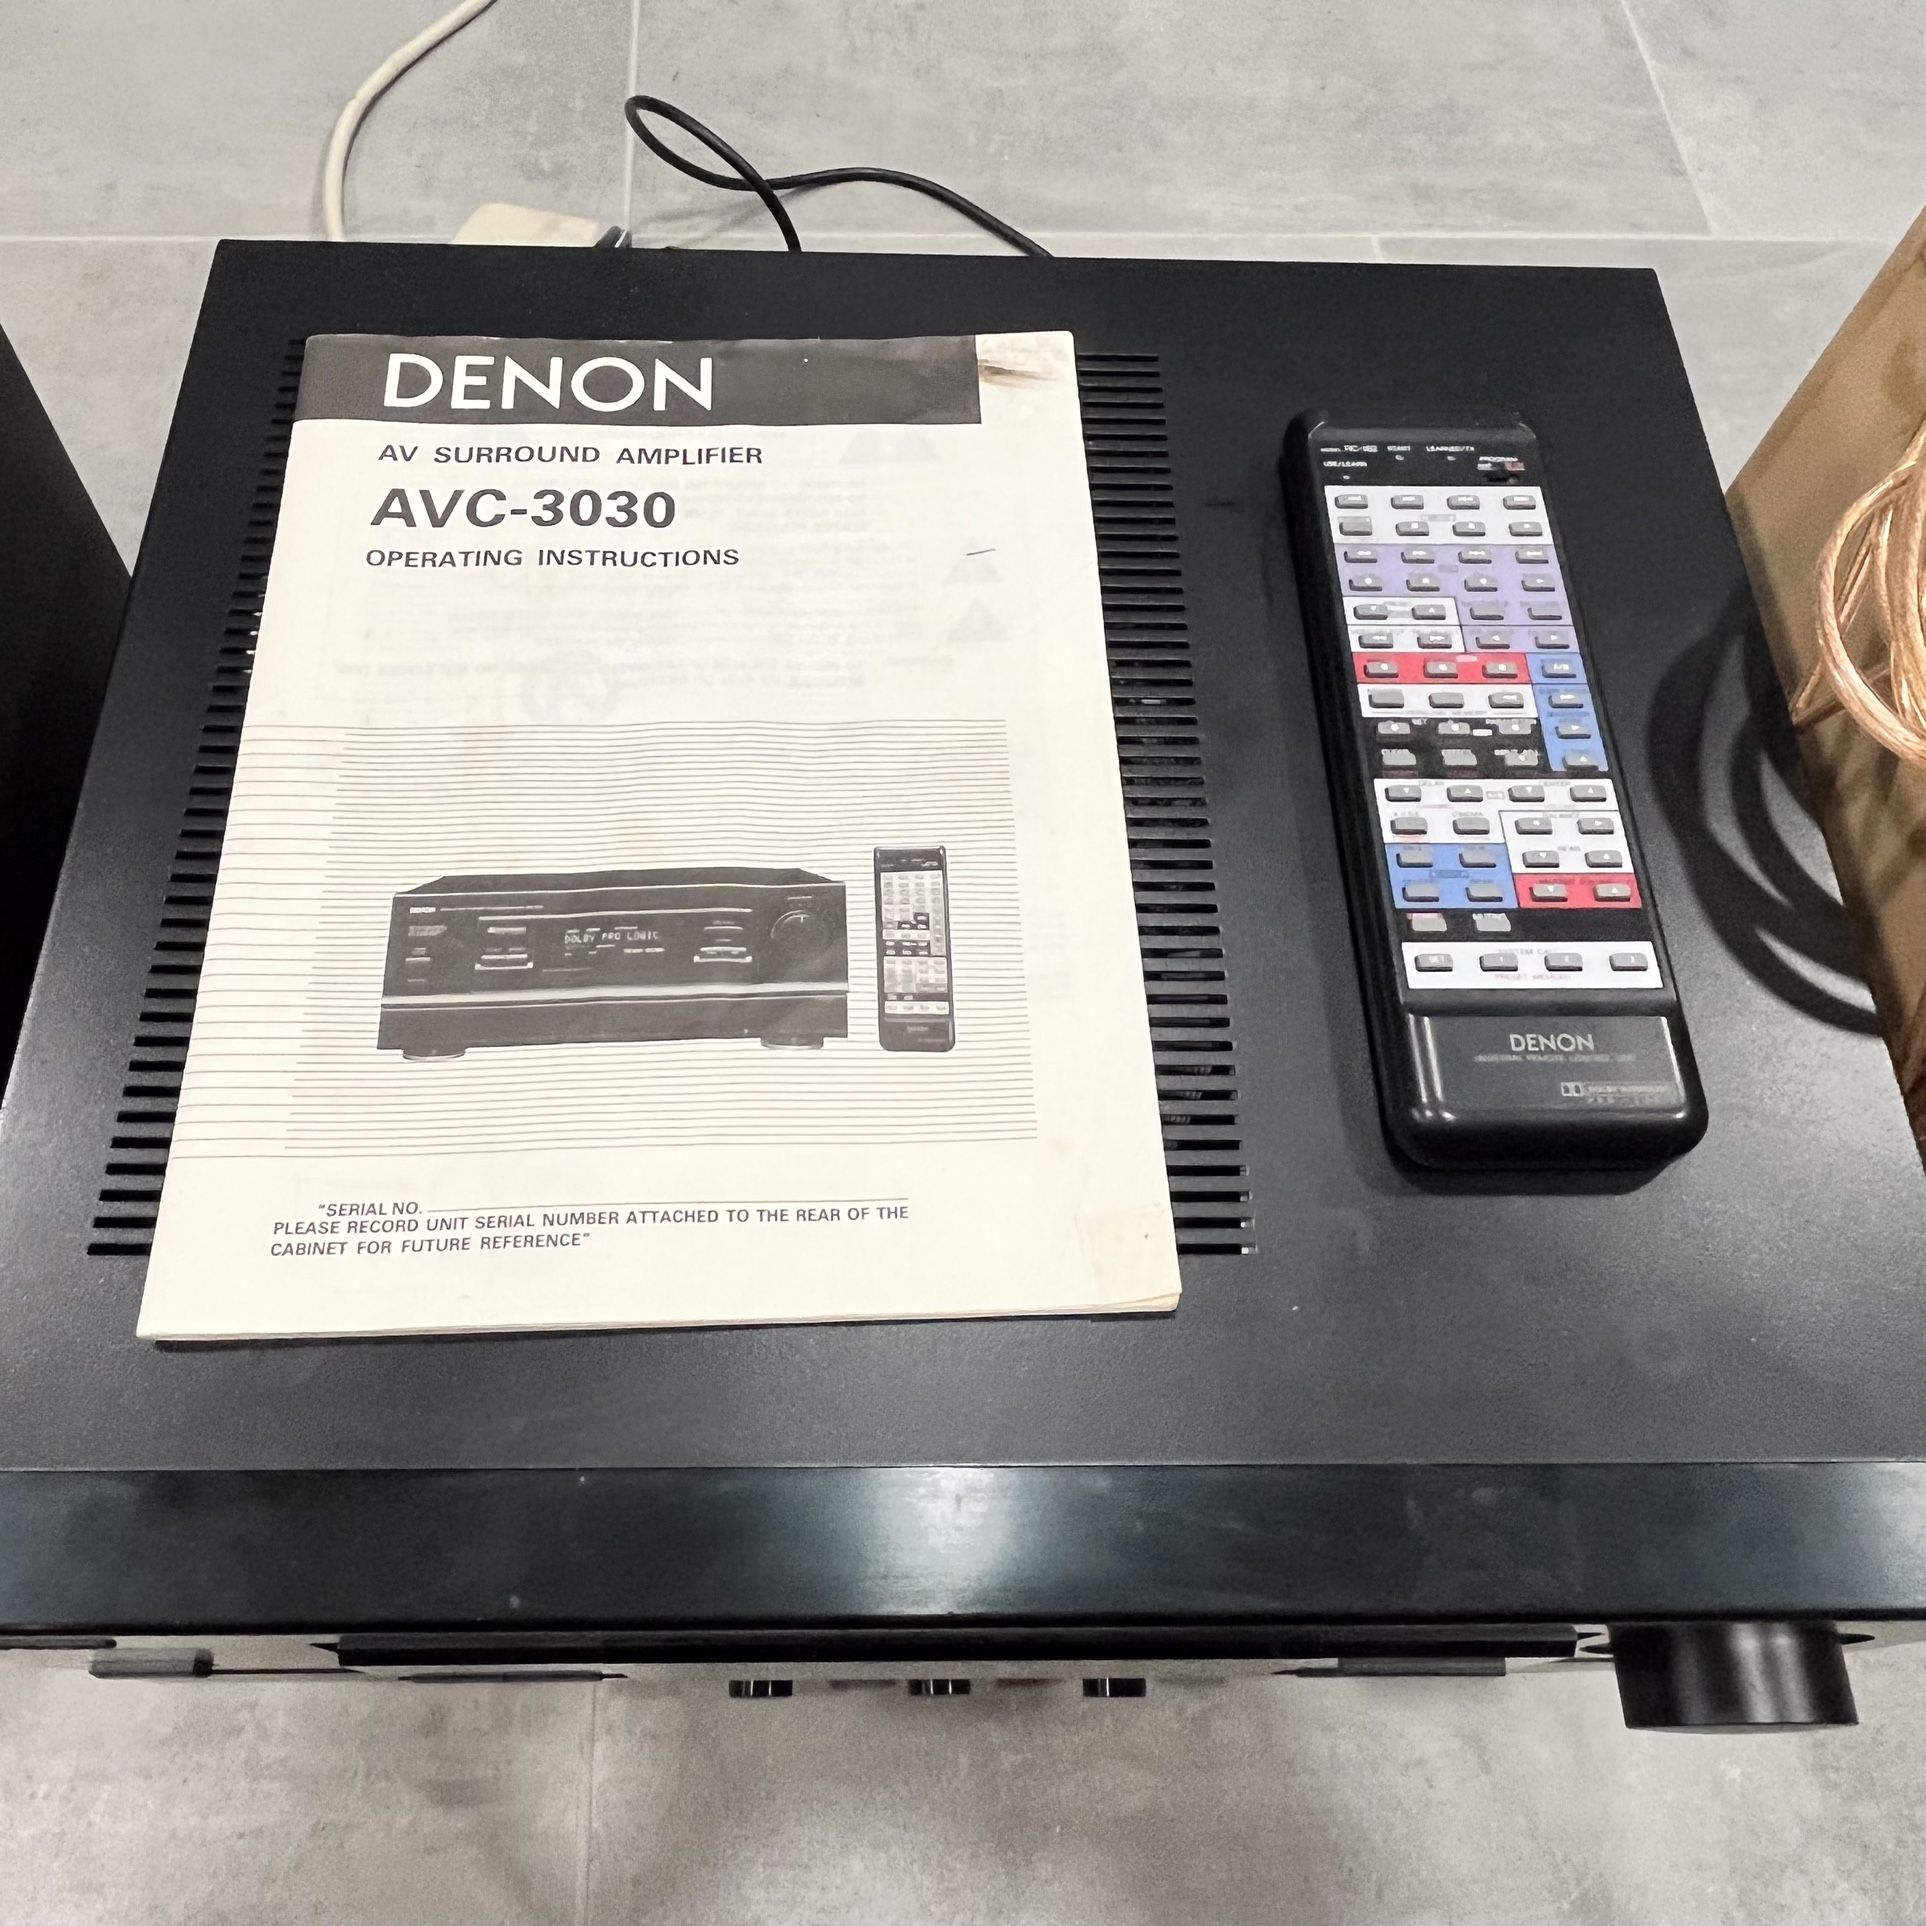 Stereo home theater equipment speakers Denon receiver subwoofer